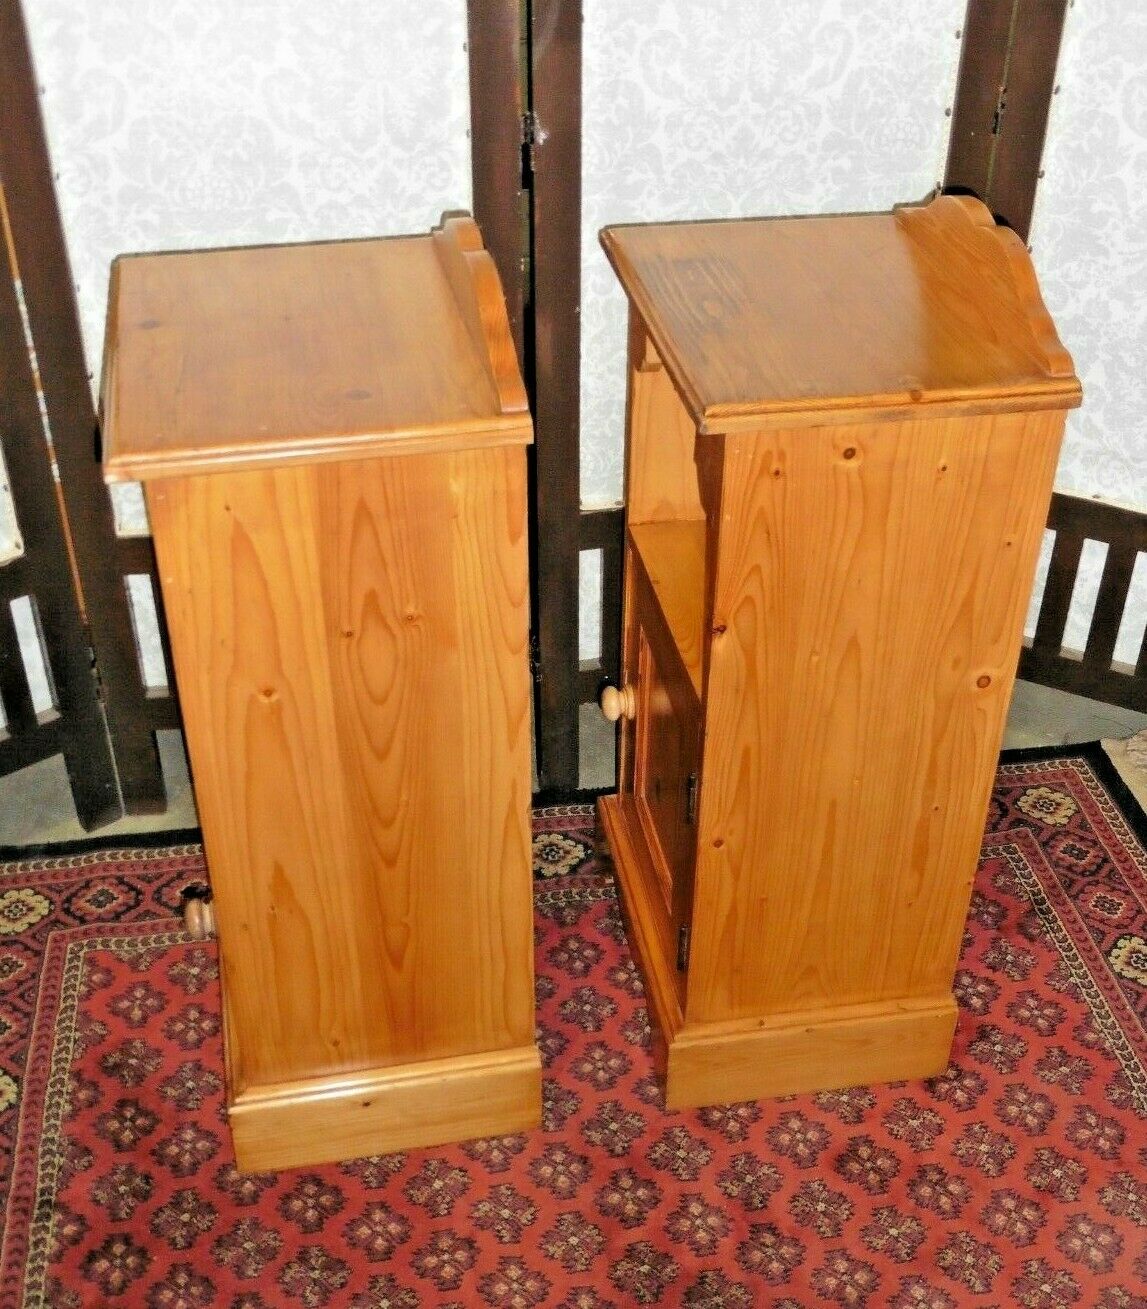 381.....A Pair Of Refinished Bedside Cabinets / Bedside Tables